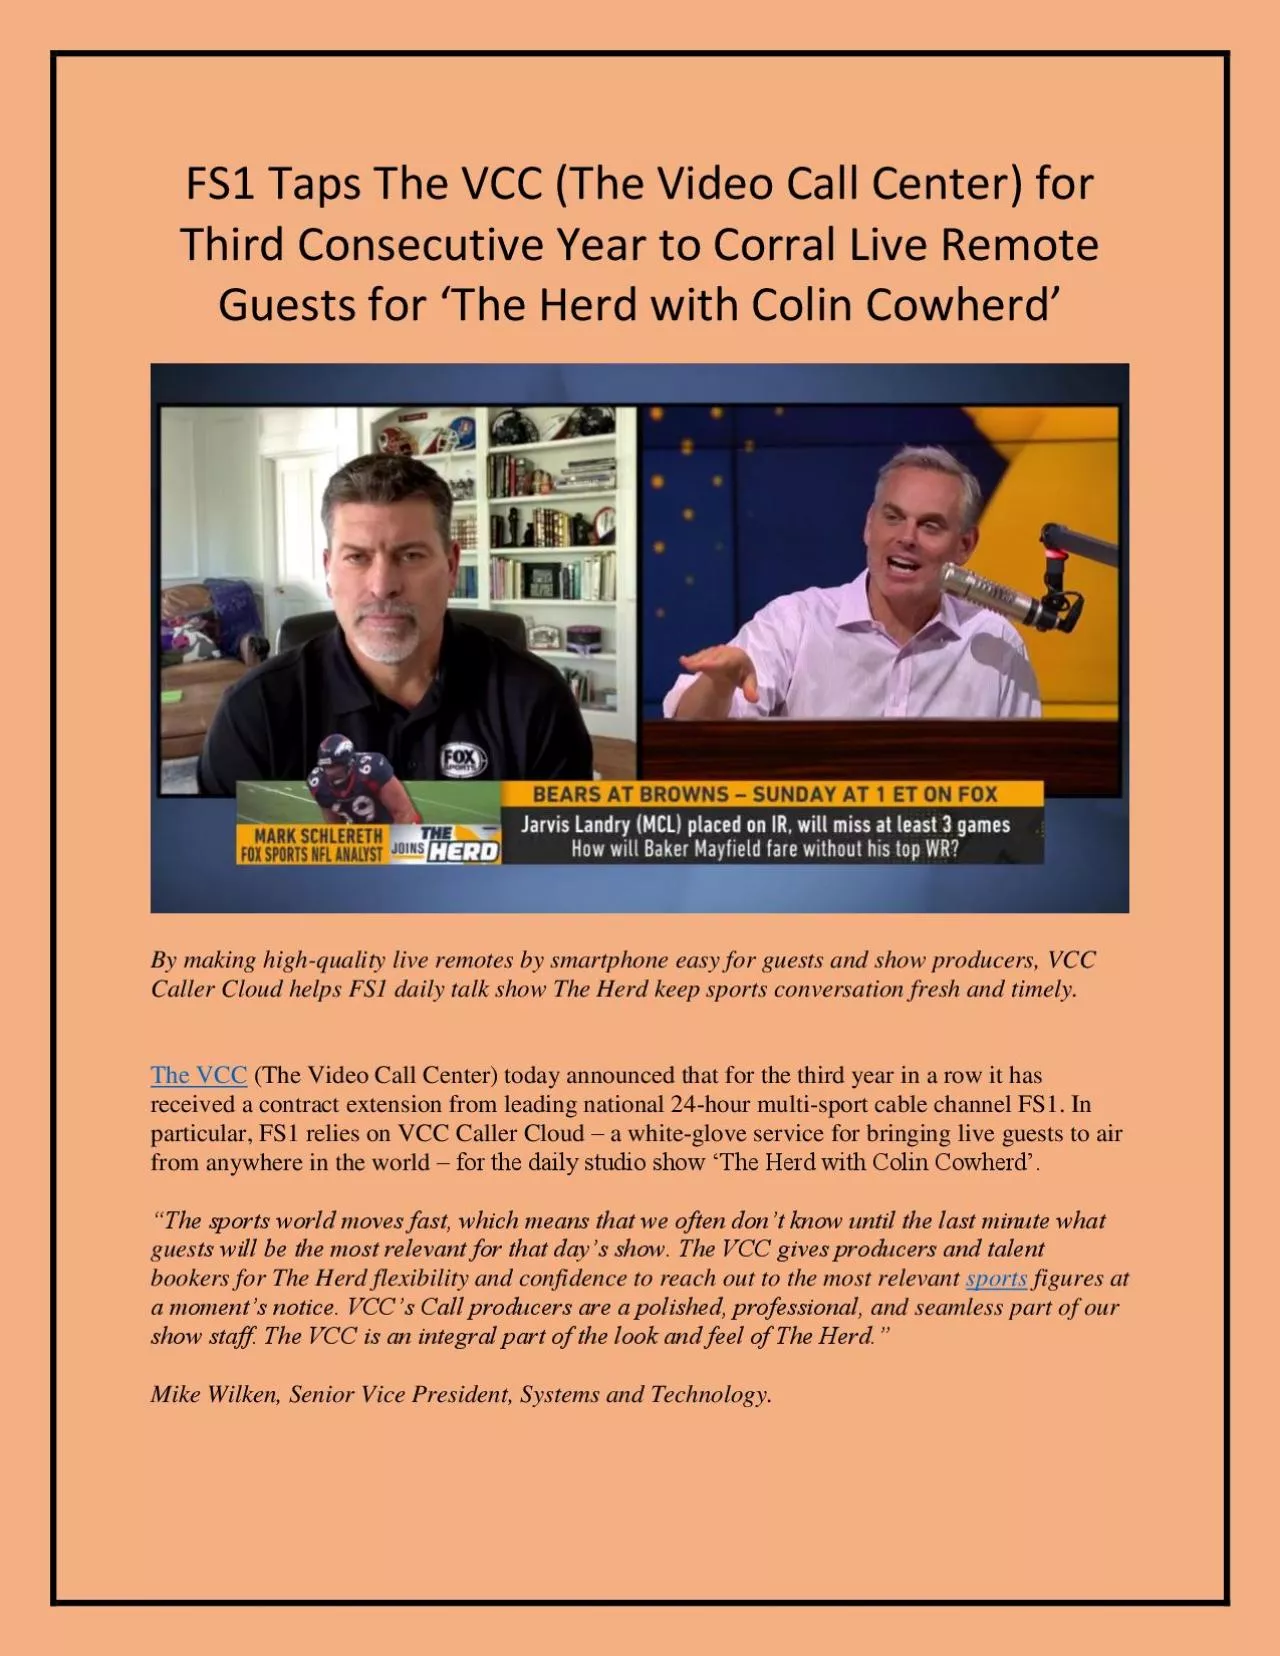 FS1 Taps The VCC for Third Consecutive Year to Corral Live Remote Guests for ‘The Herd